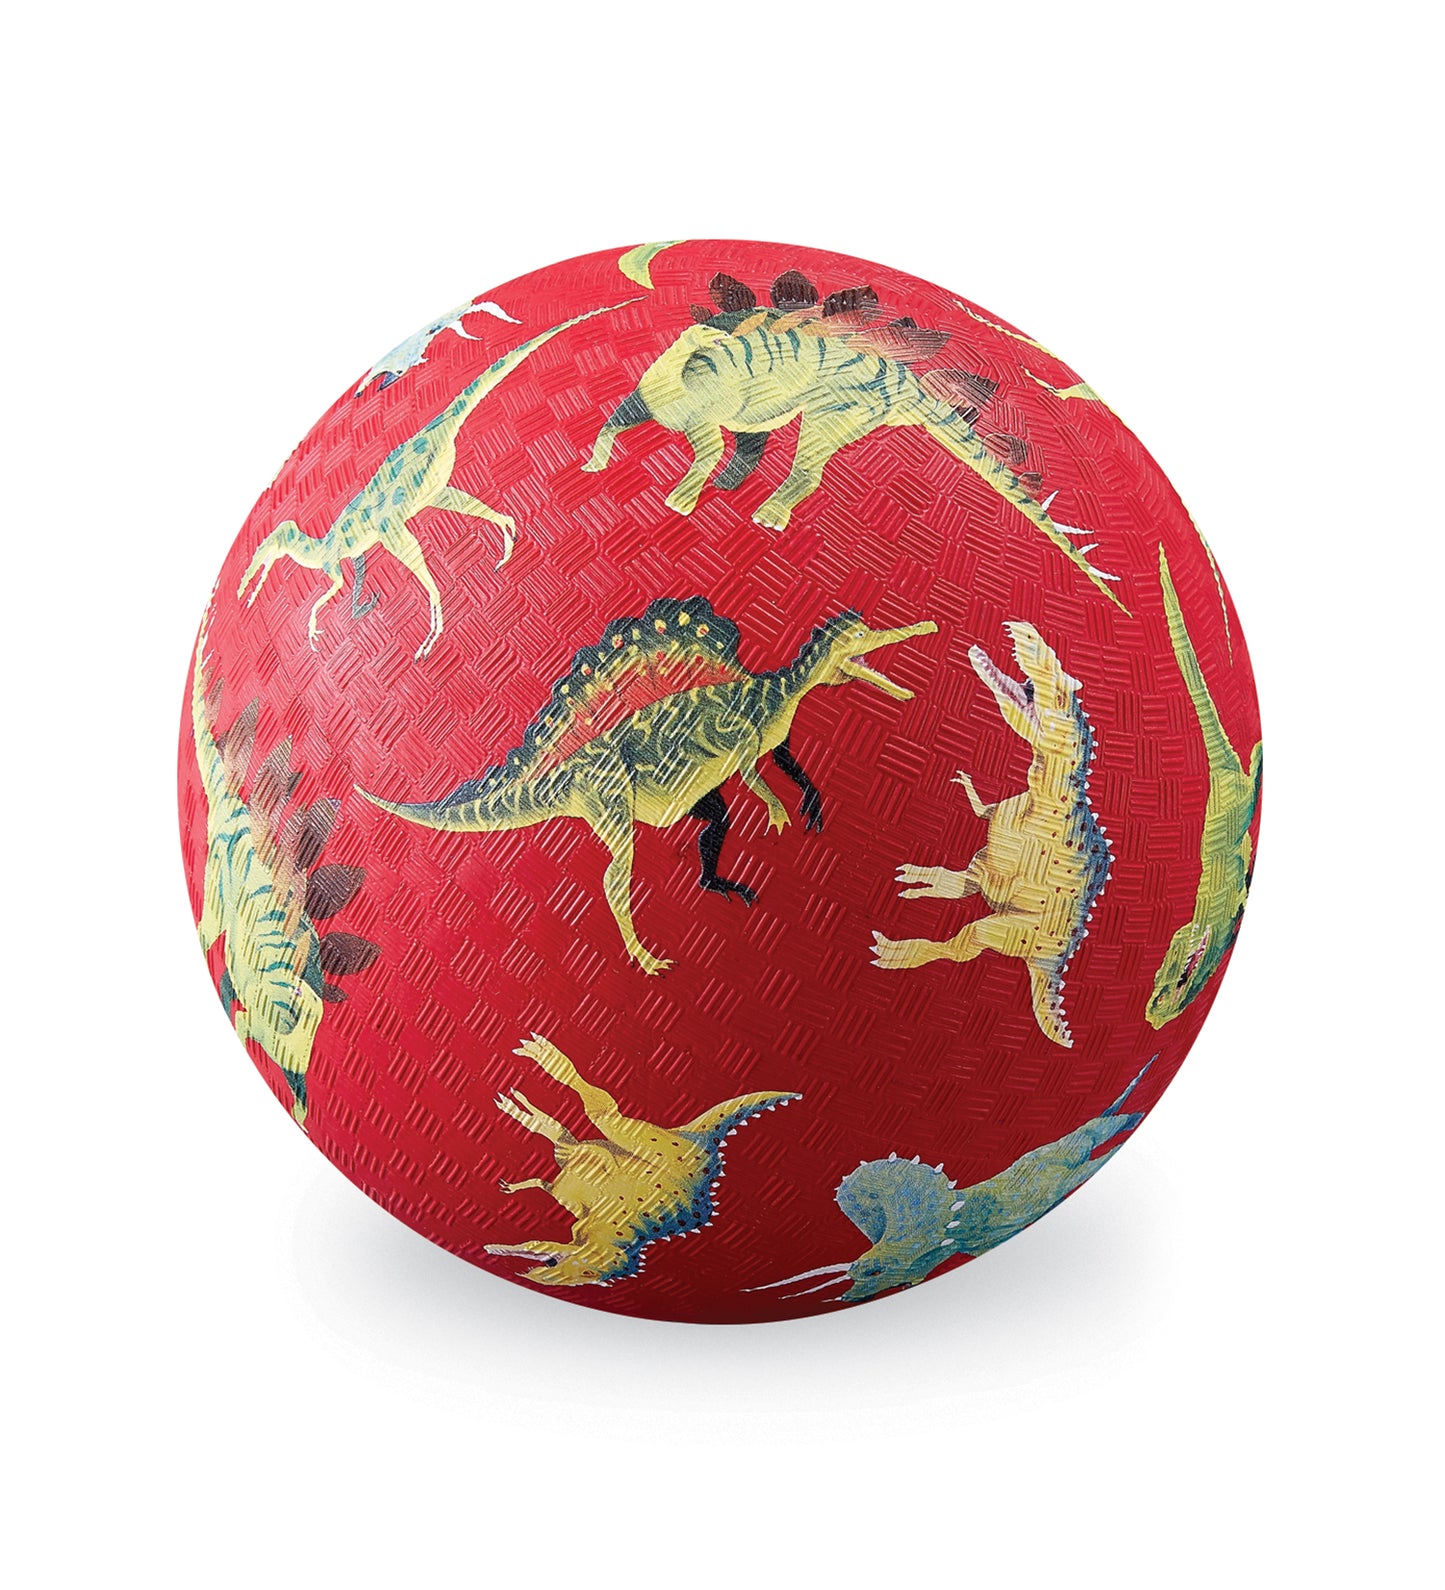 5" Playground Ball - Many Pattern Choices